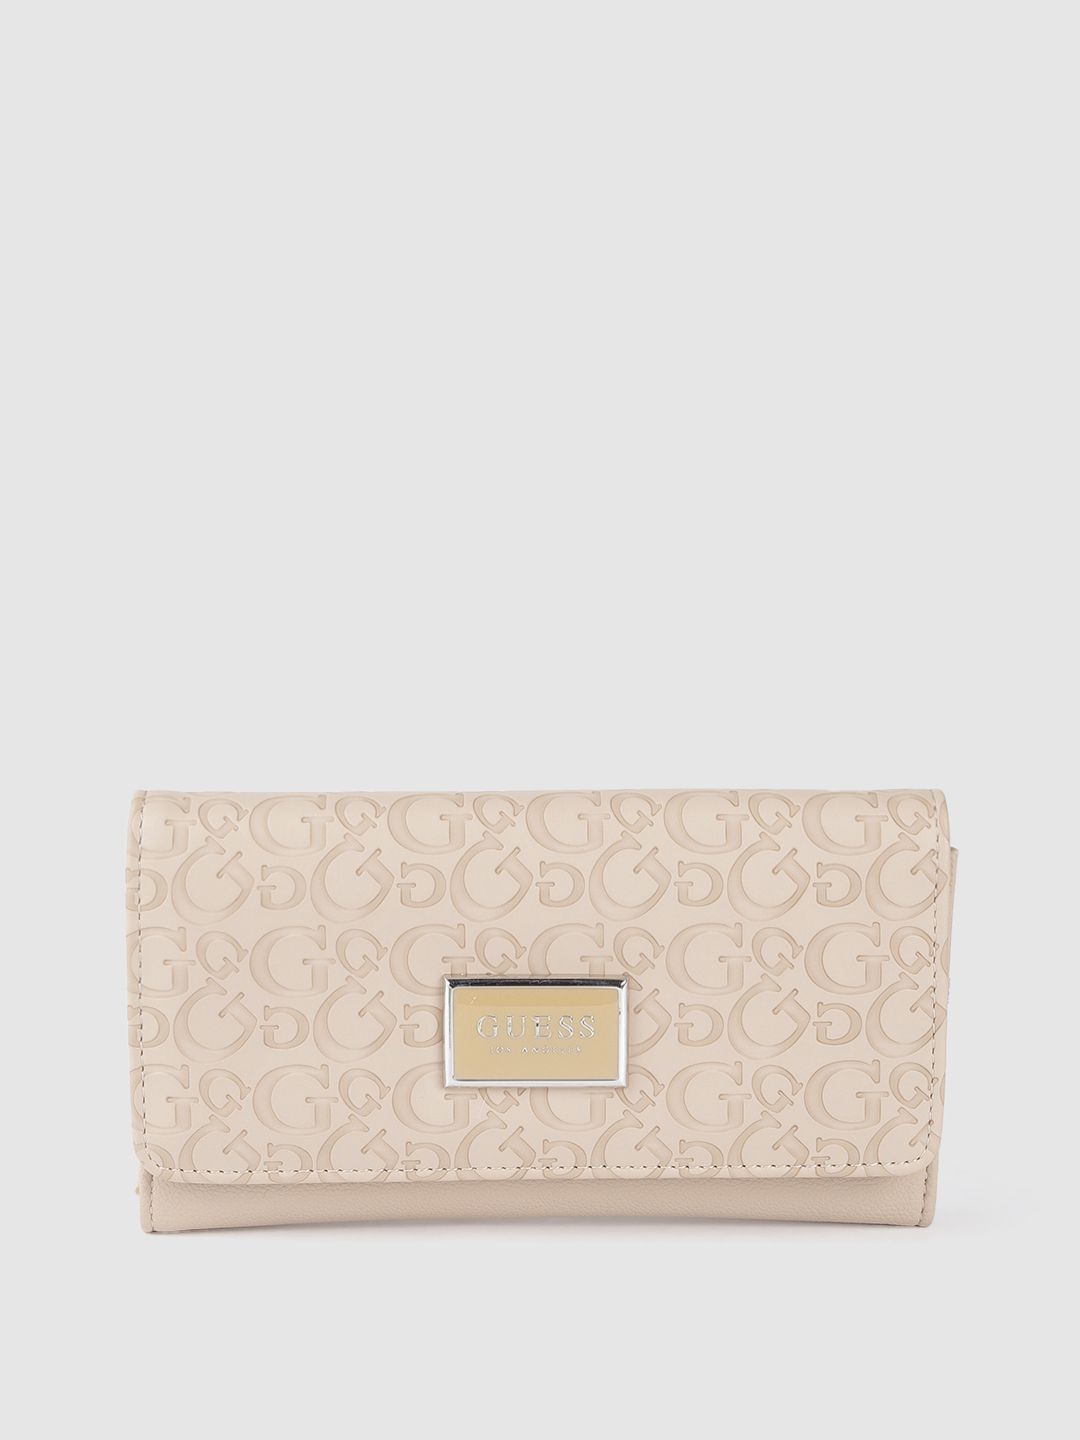 GUESS Women Beige Brand Logo Textured Three Fold Wallet Price in India